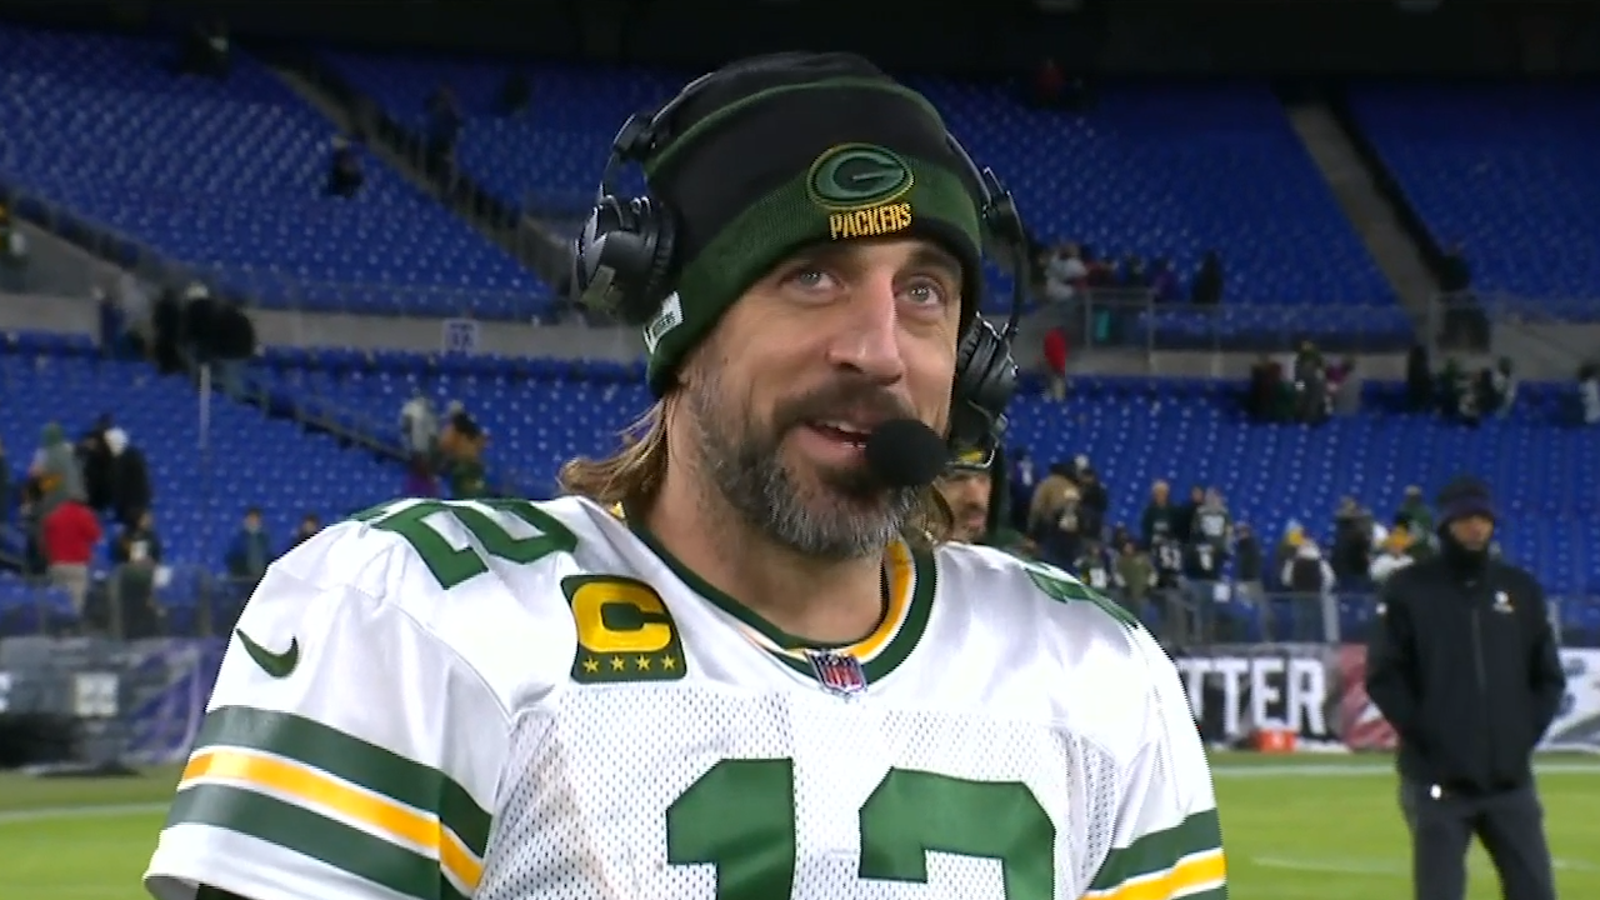 "Hopefully I can break that record at home on Christmas." — Aaron Rodgers on tying Brett Favre's record